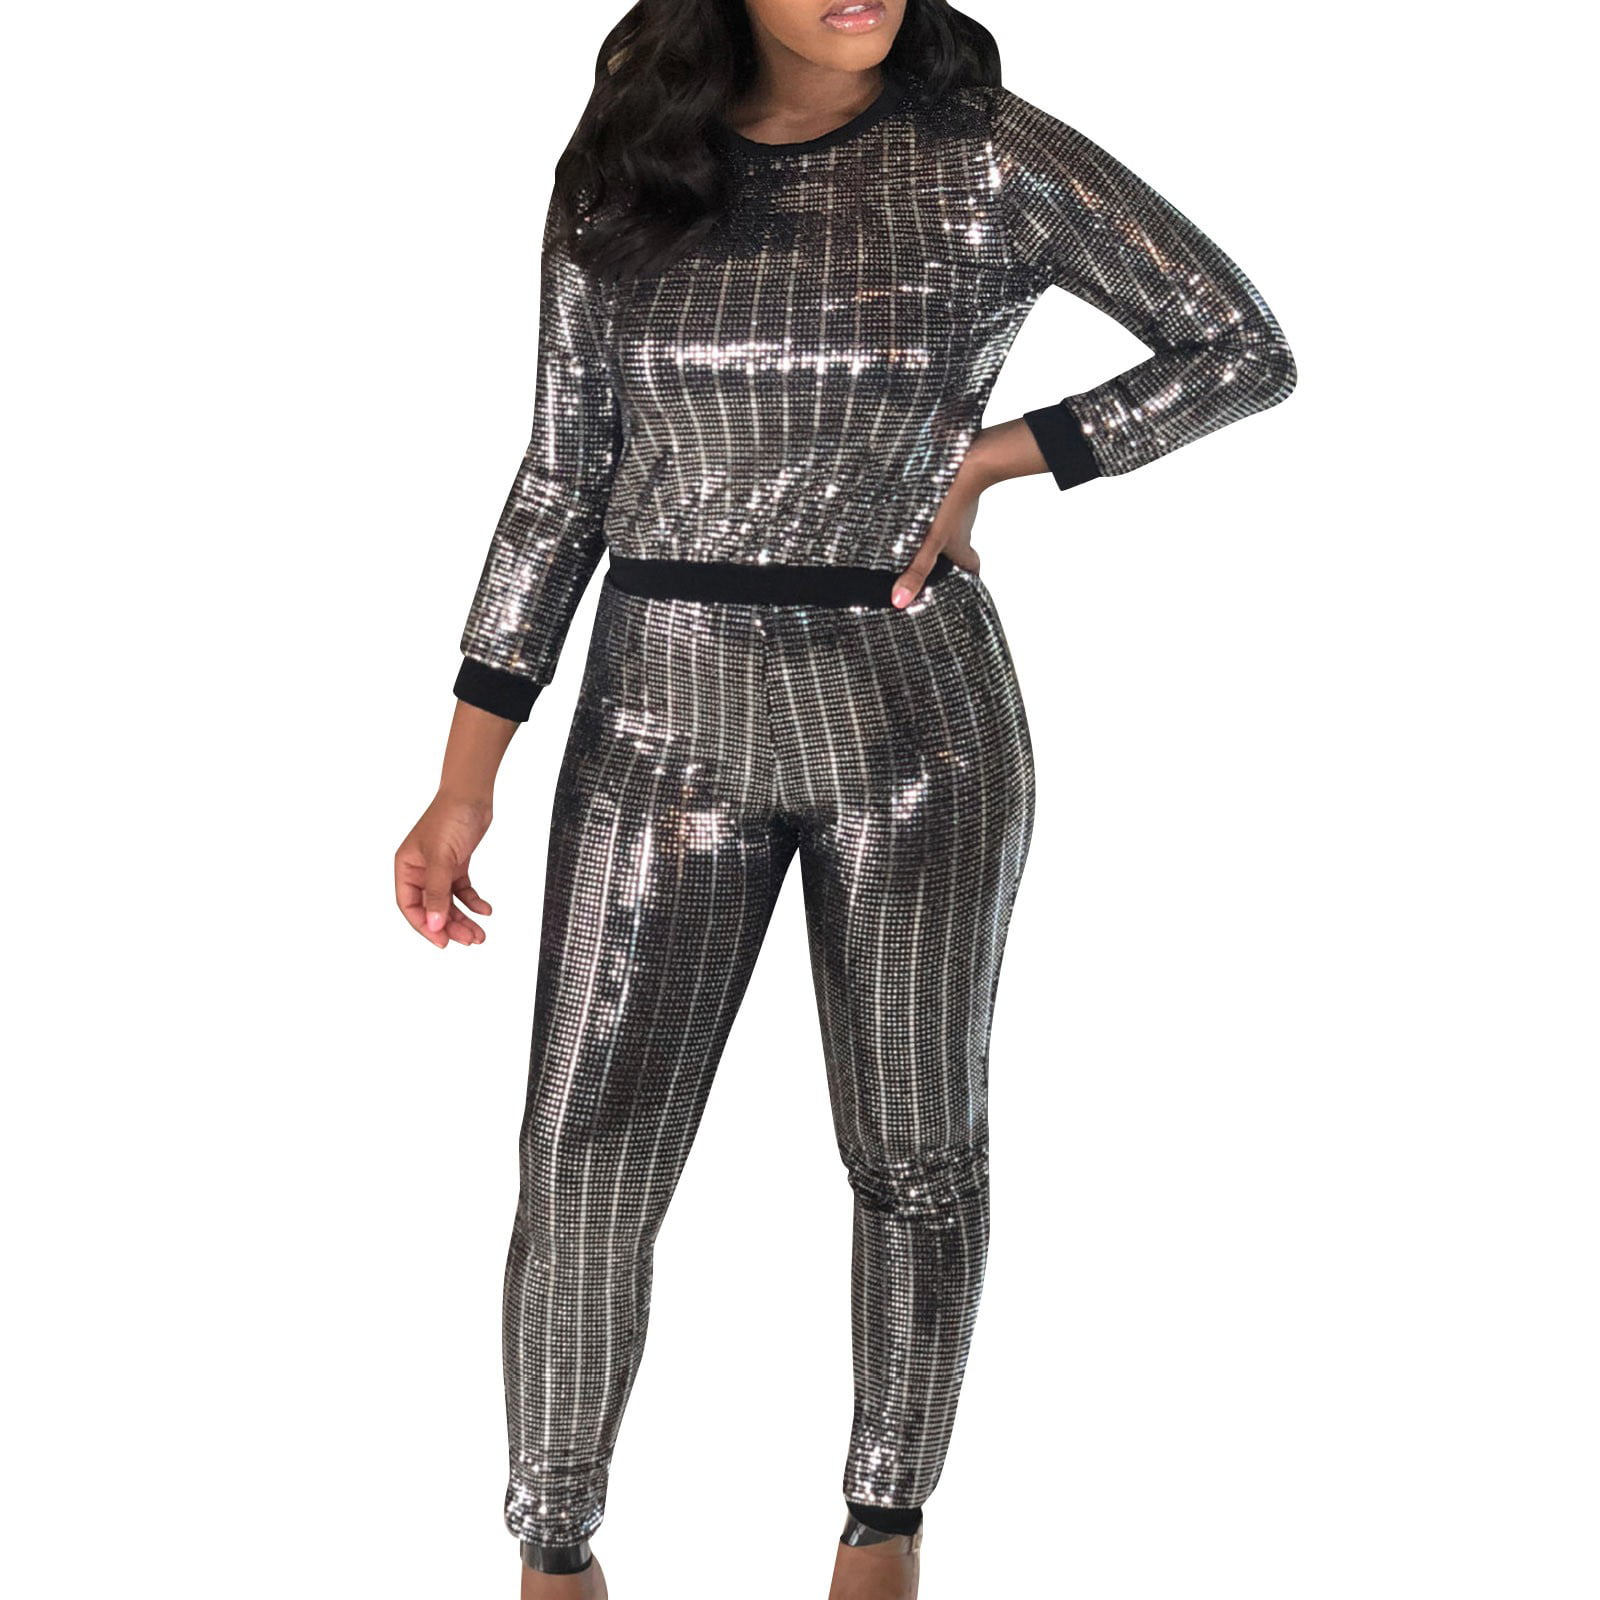 Source Sparkle Glitter Sequins Womens basketball jersey dress with